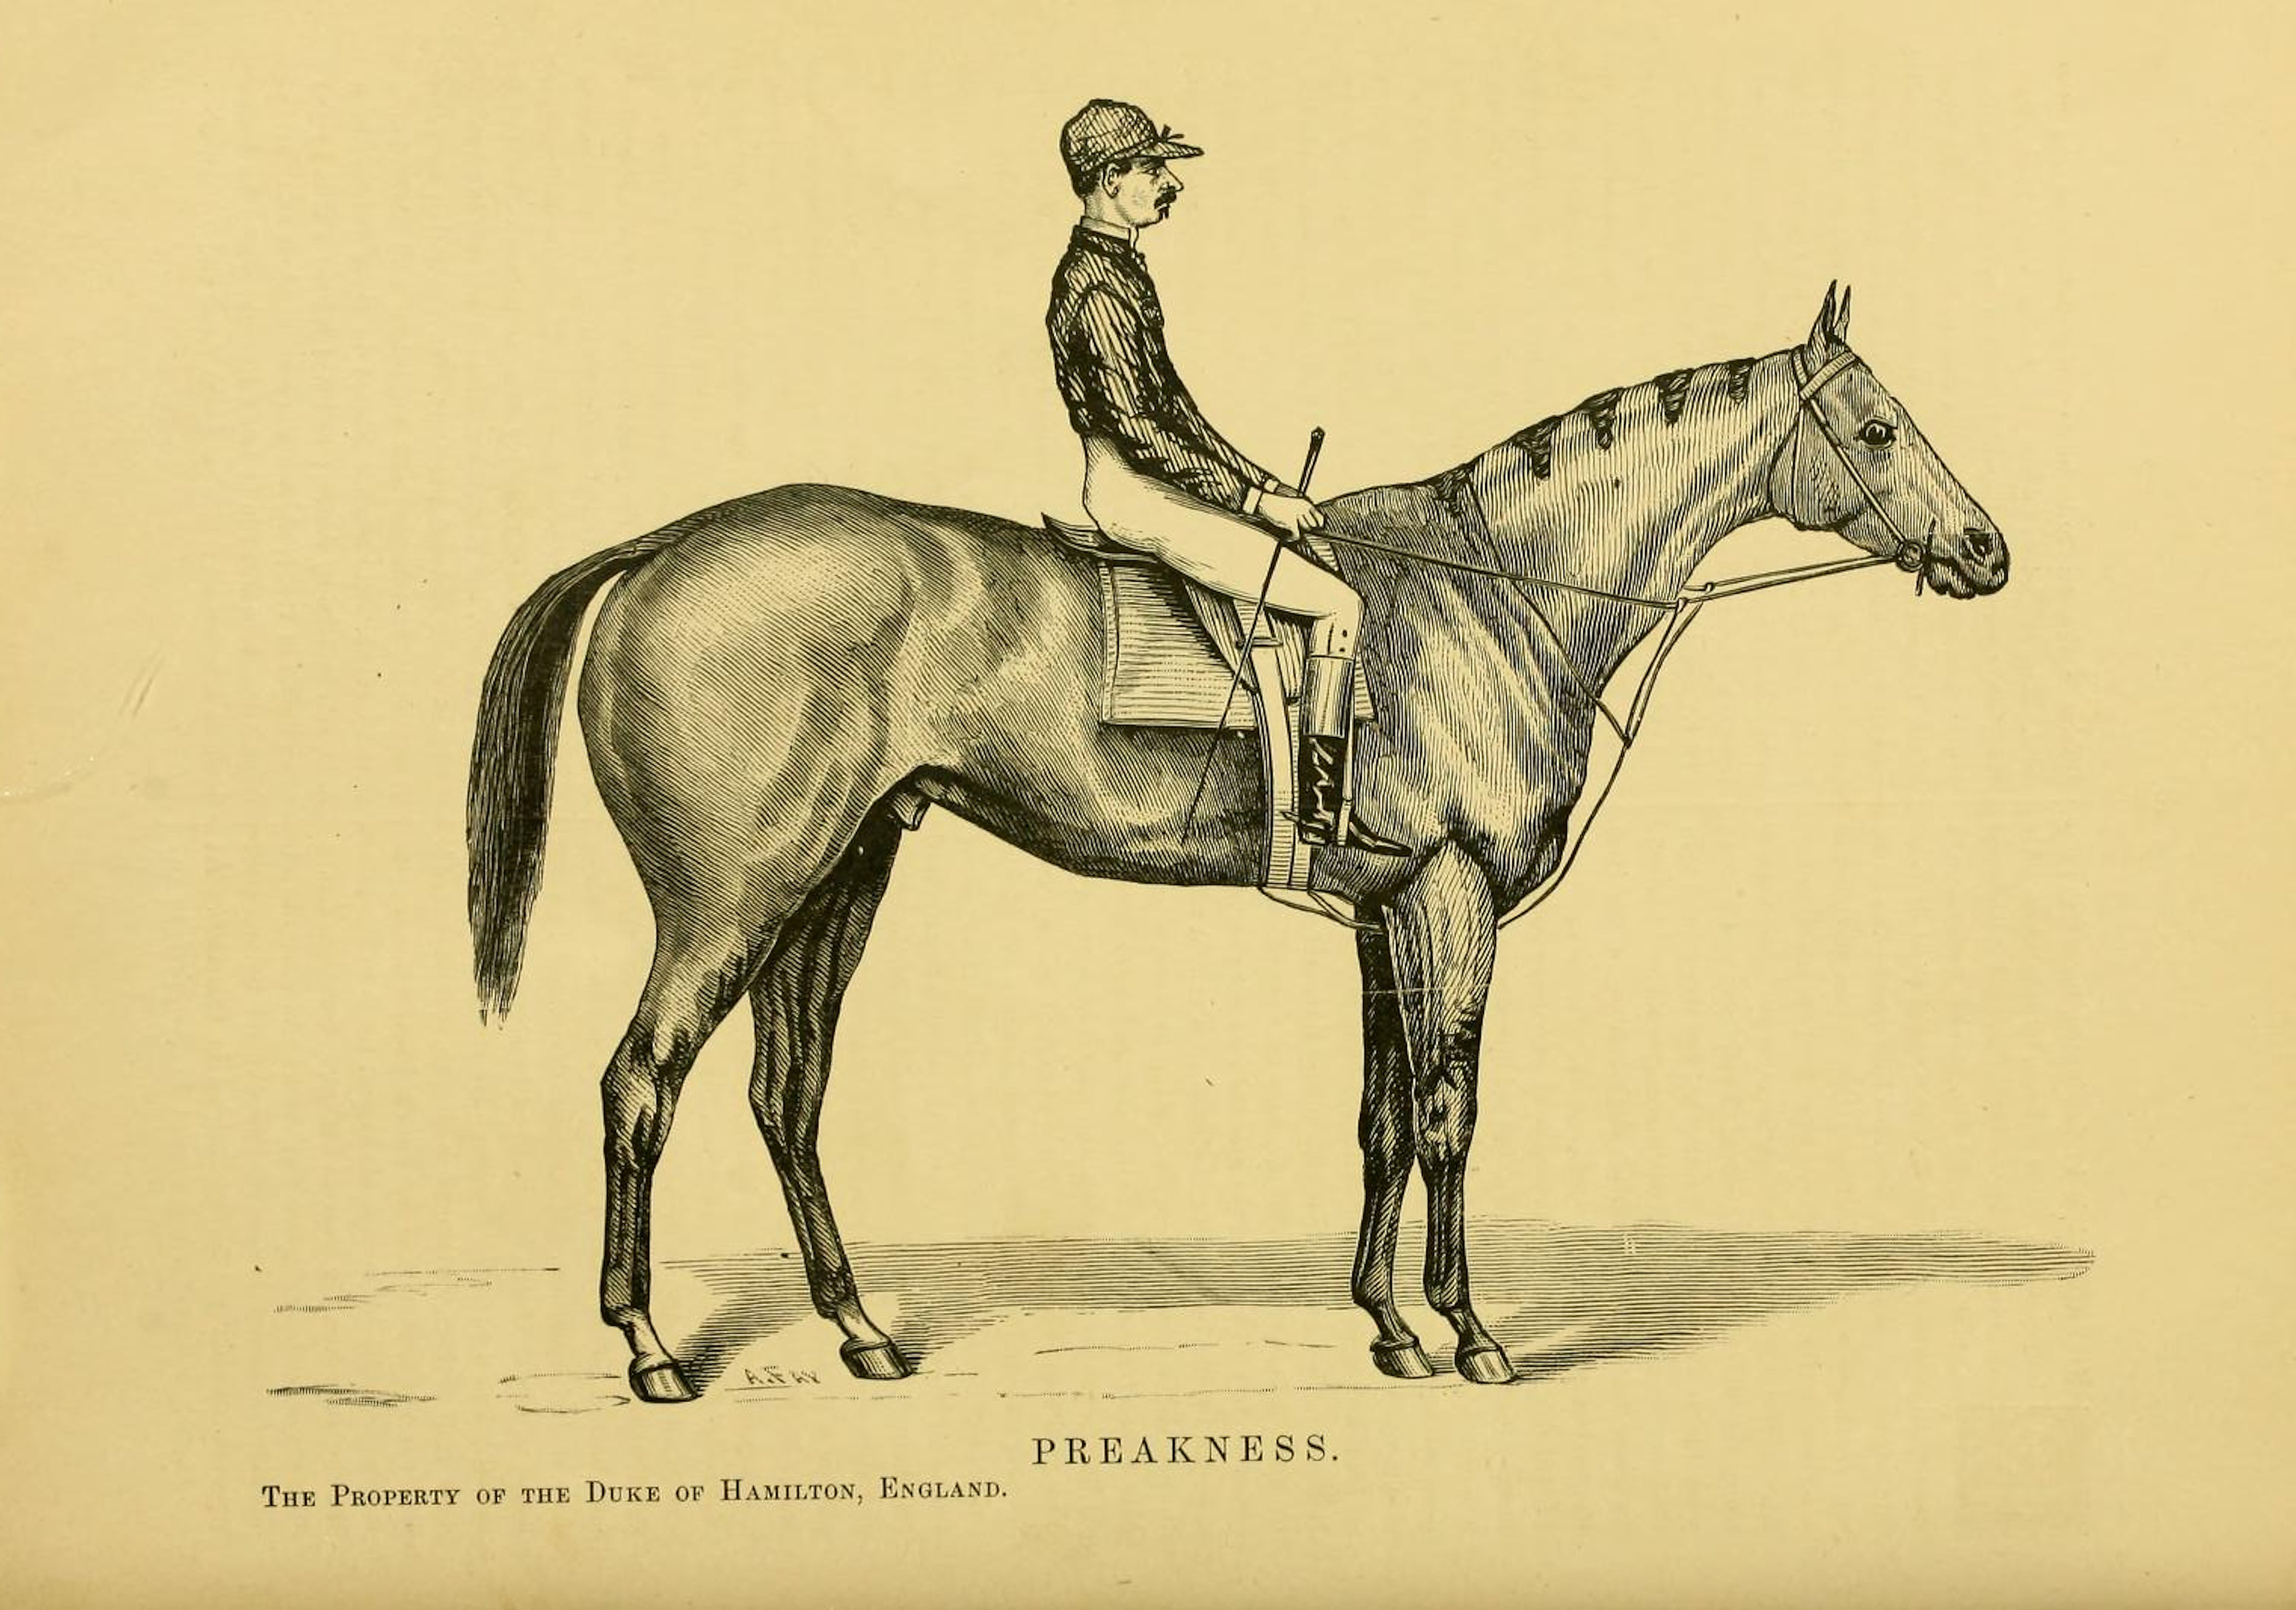 A likeness of Preakness with an unidentified rider from "Famous American Horses" 